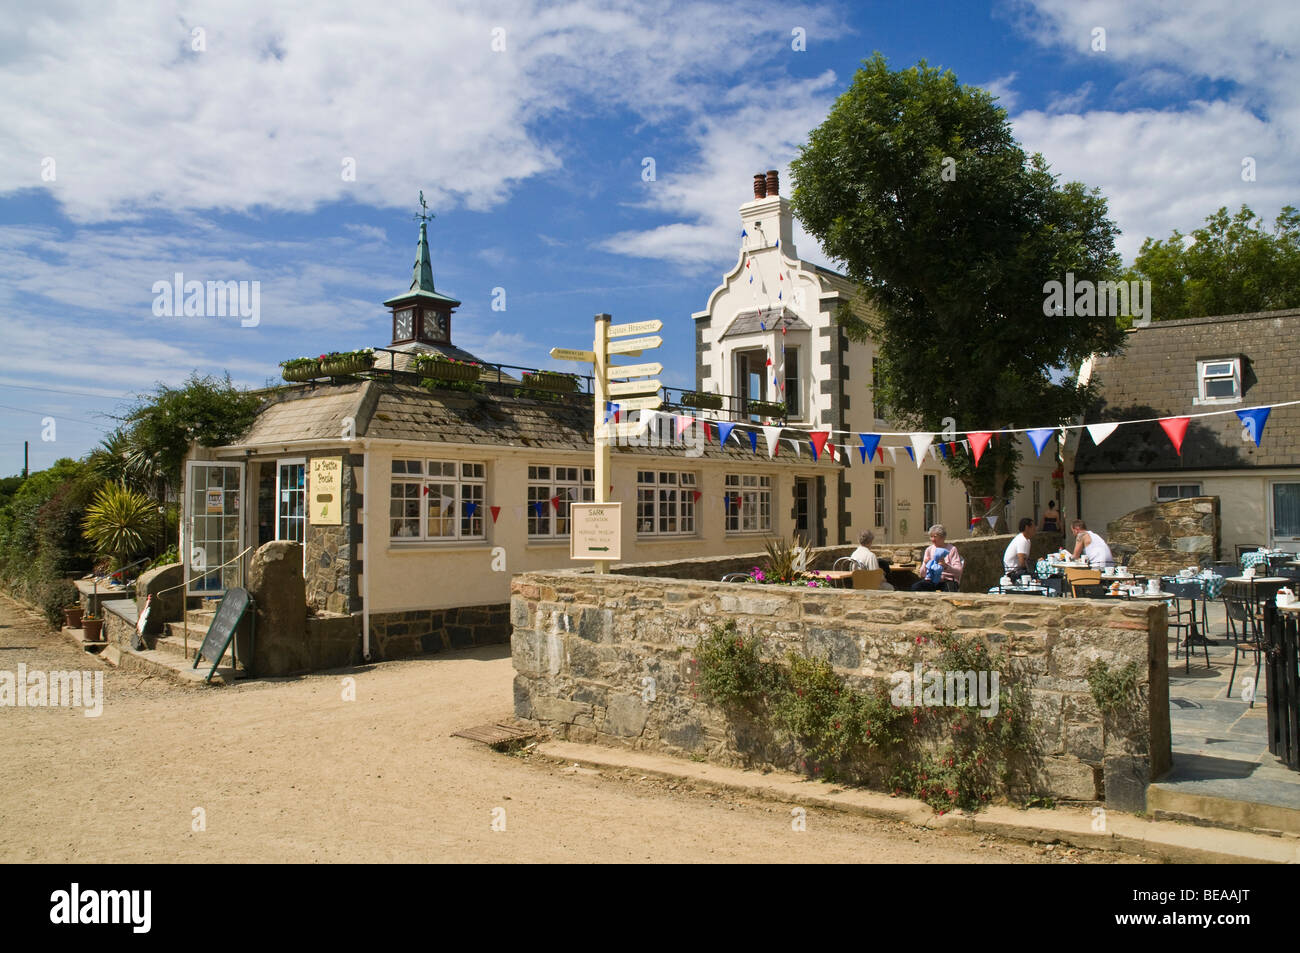 dh  SARK VILLAGE SARK ISLAND Village tourist cafe customers relaxing outdoors and main street buildings Stock Photo